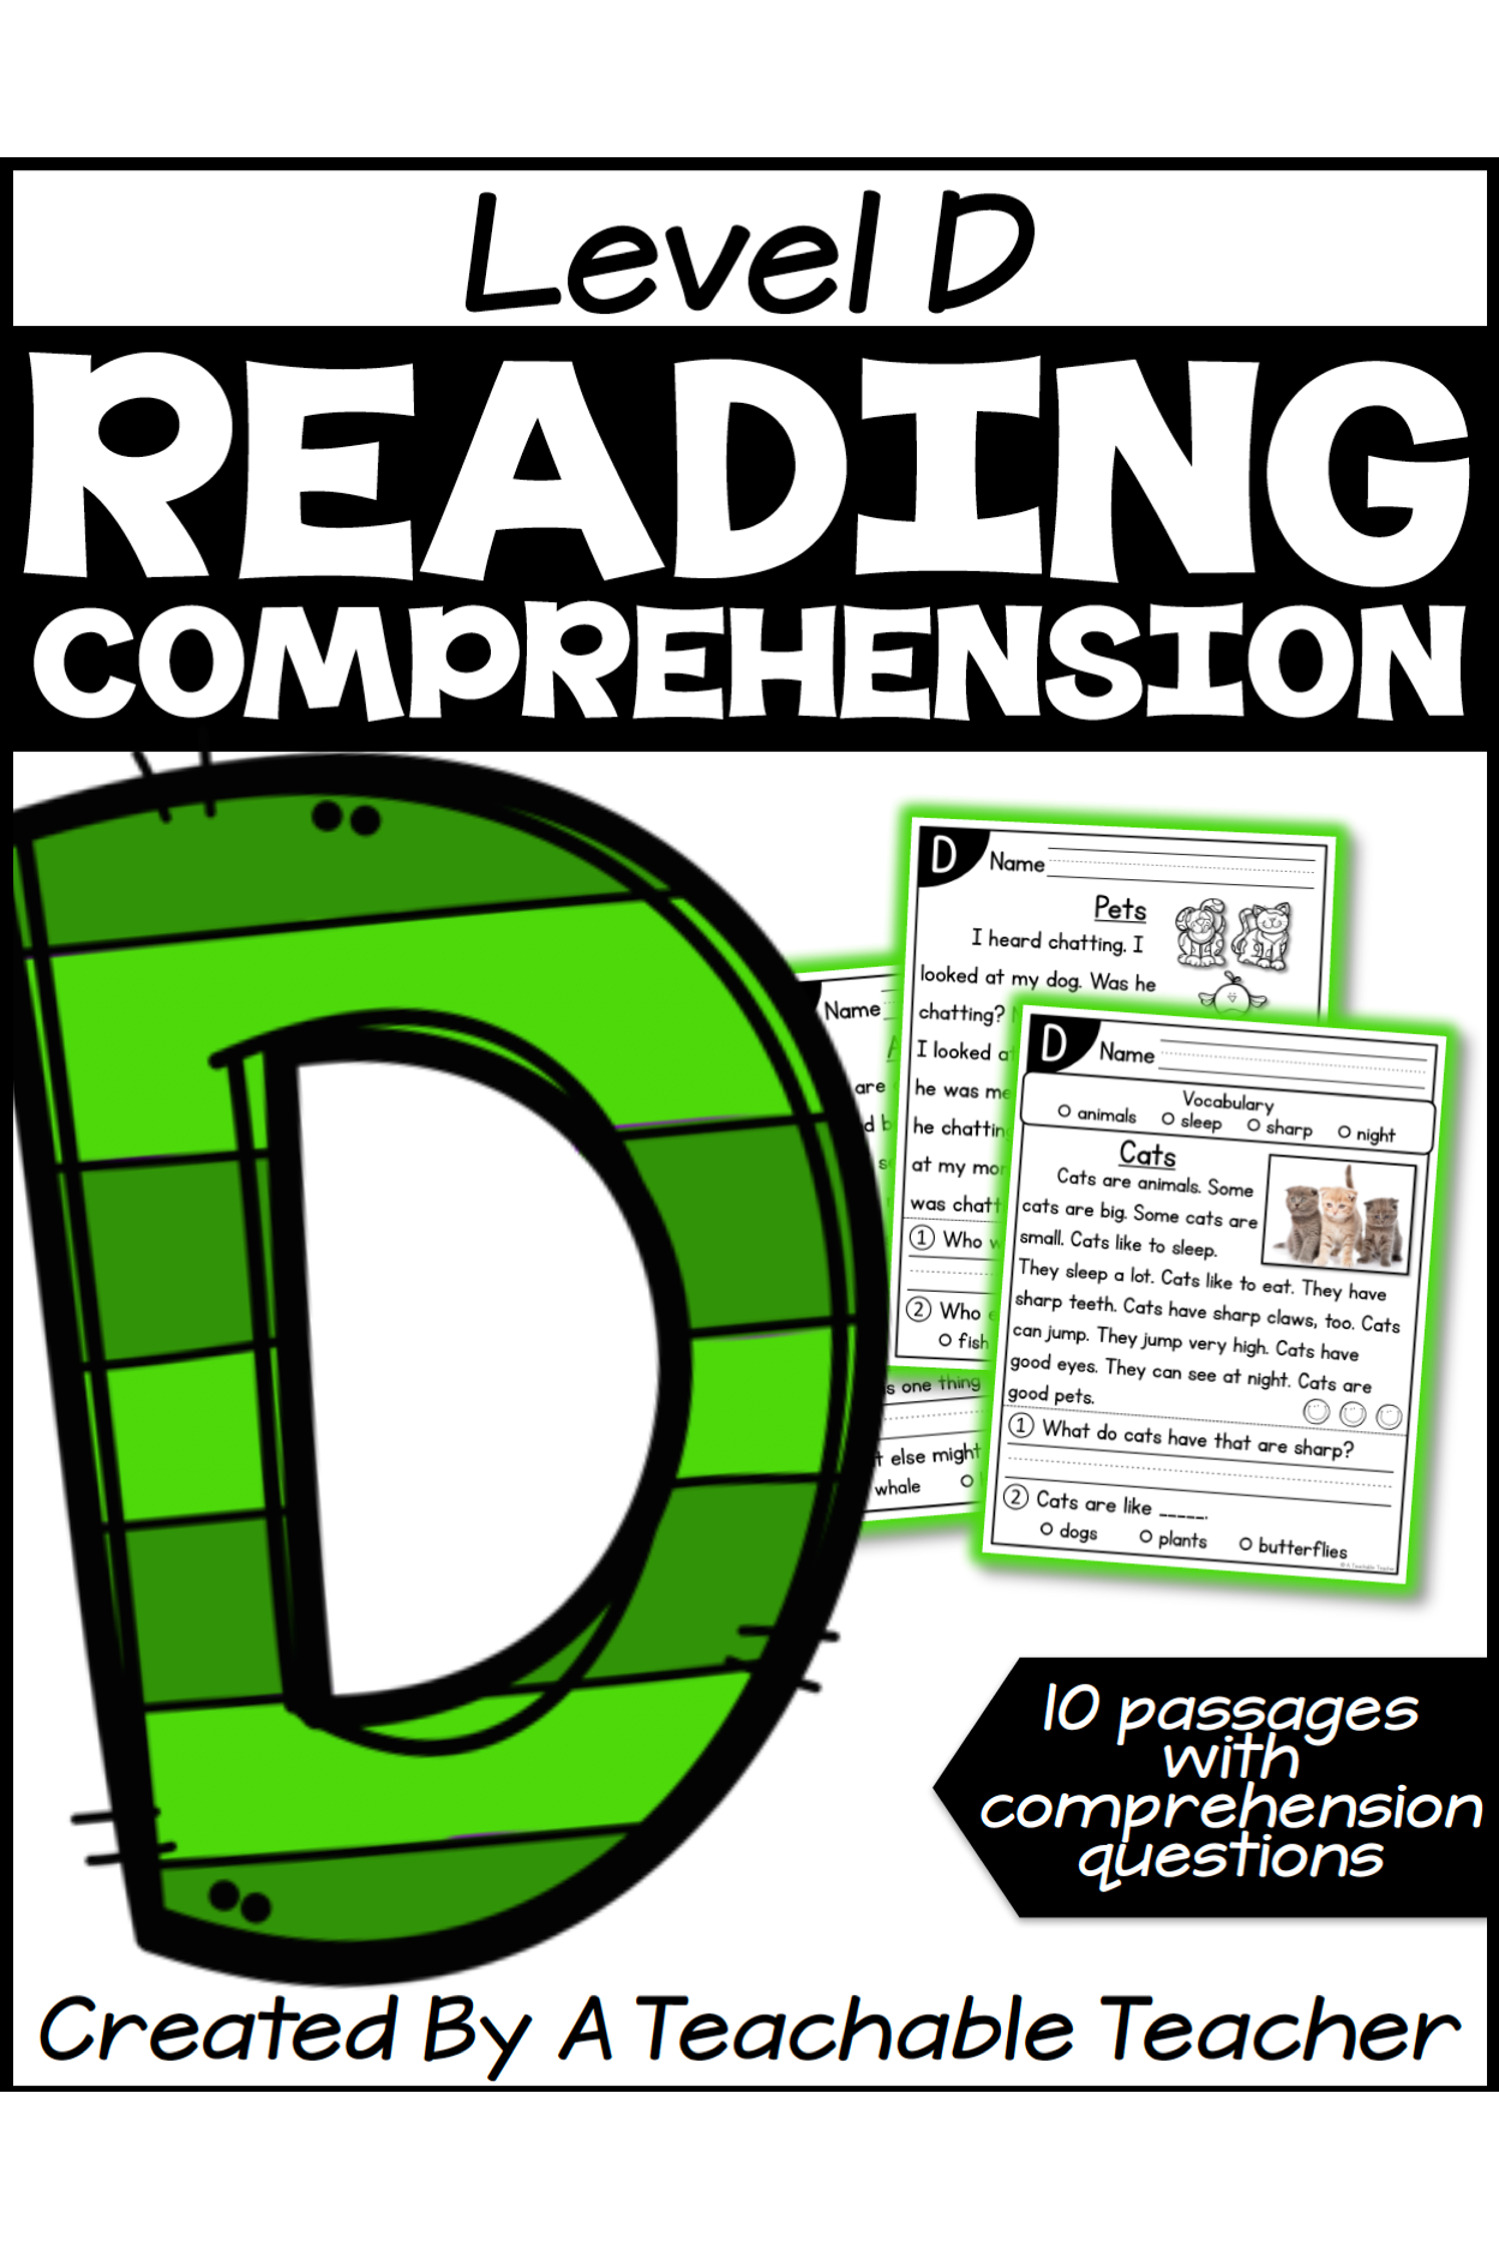 Level D Reading Comprehension Passages And Questions A Teachable Teacher